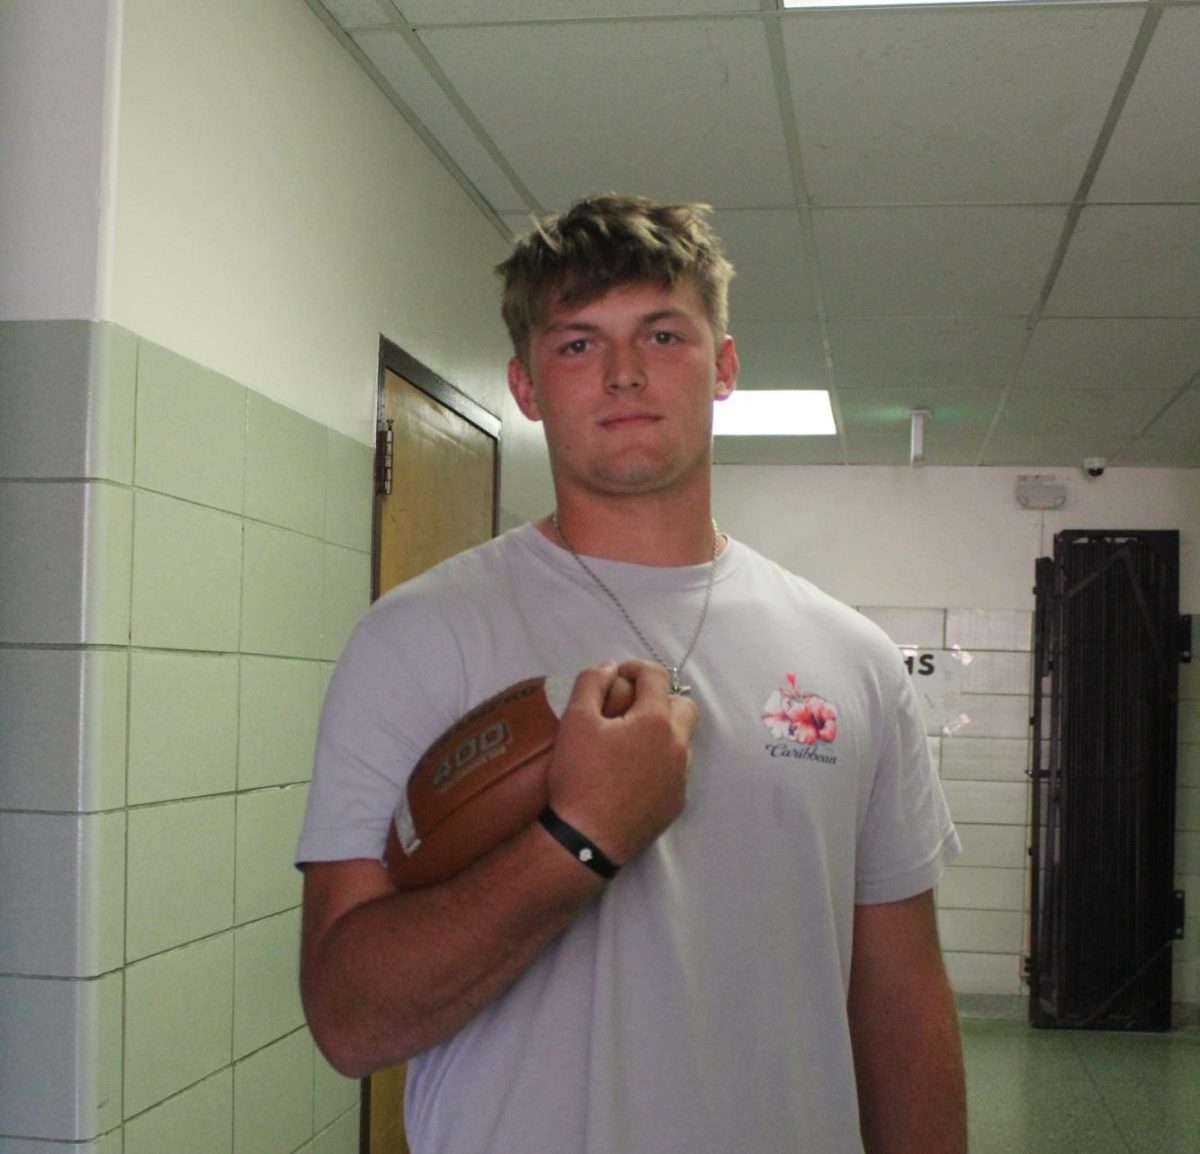 GJHS junior Will Applegate is the quarterback of the football team. The next football game is on Thursday, Sept. 7.